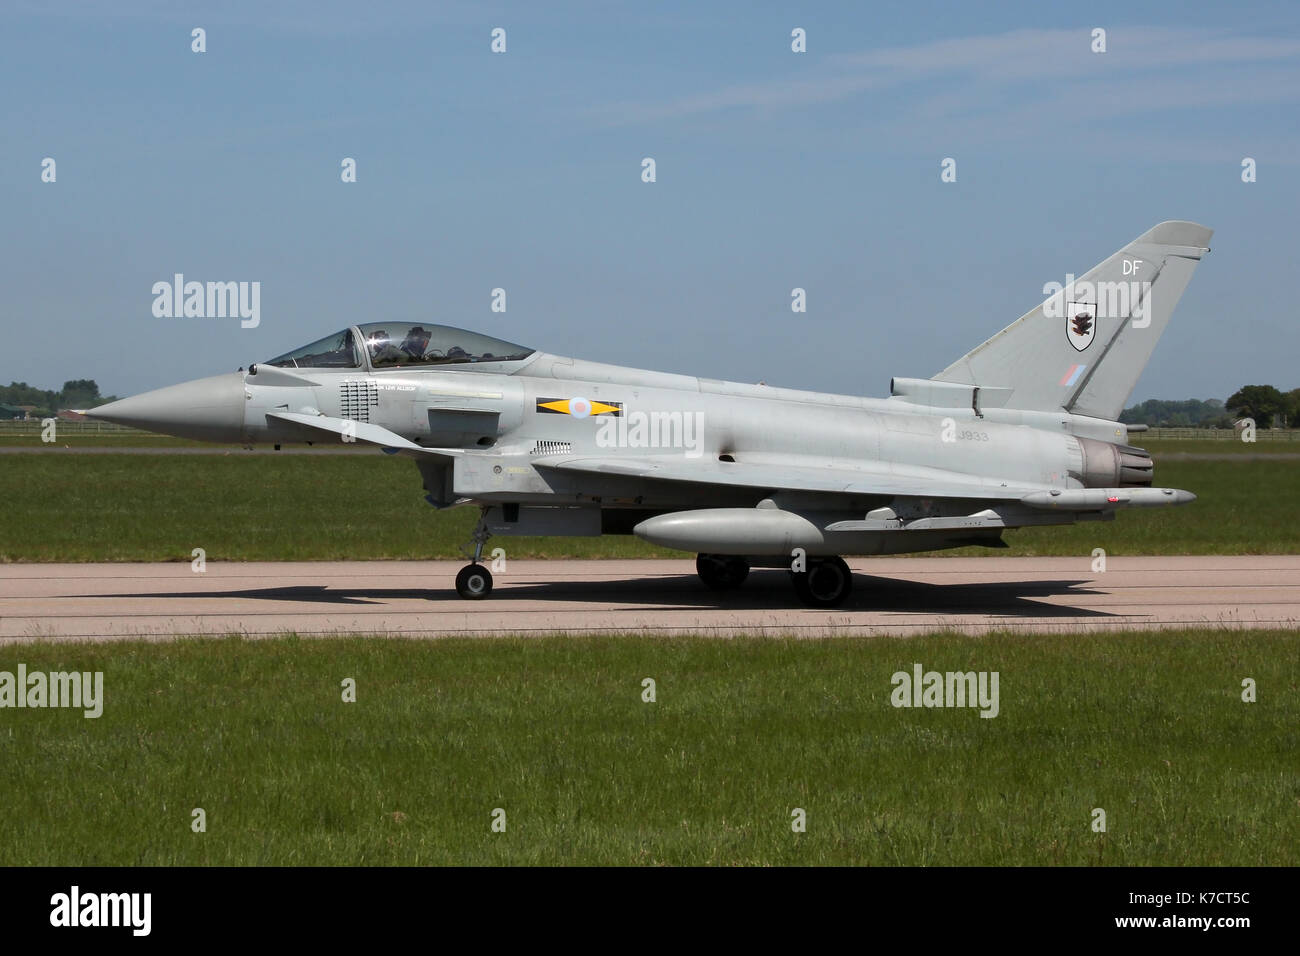 11 Squadron Typhoon taxiing back to the Coningsby shelters. Aircraft still shows mission markings from Operation Ellamy and sorties over Libya. Stock Photo